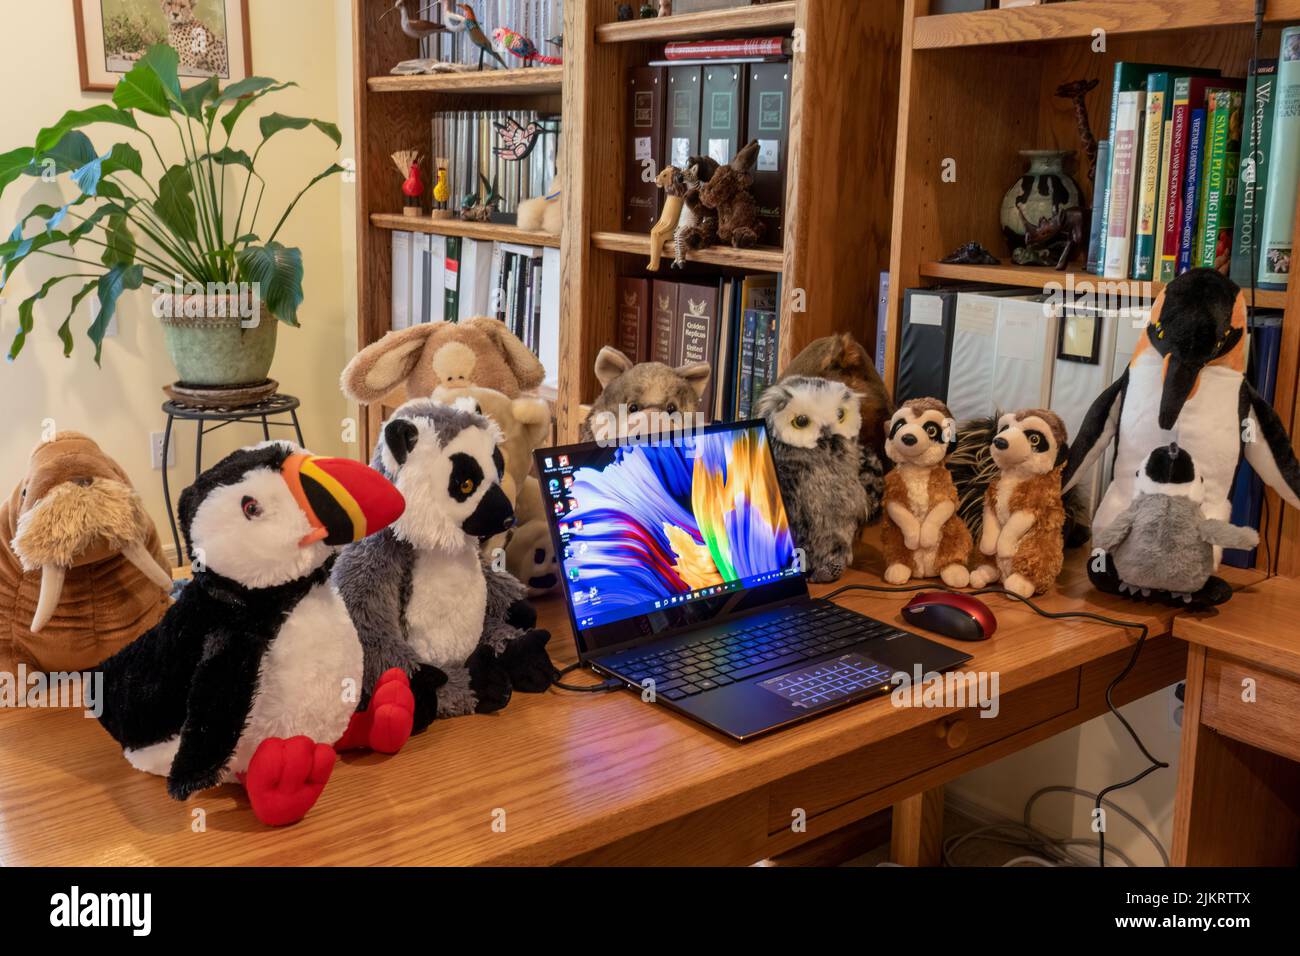 Issaquah, Washington, USA.  Laptop PC surrounded by a collection of stuffed animals. Stock Photo